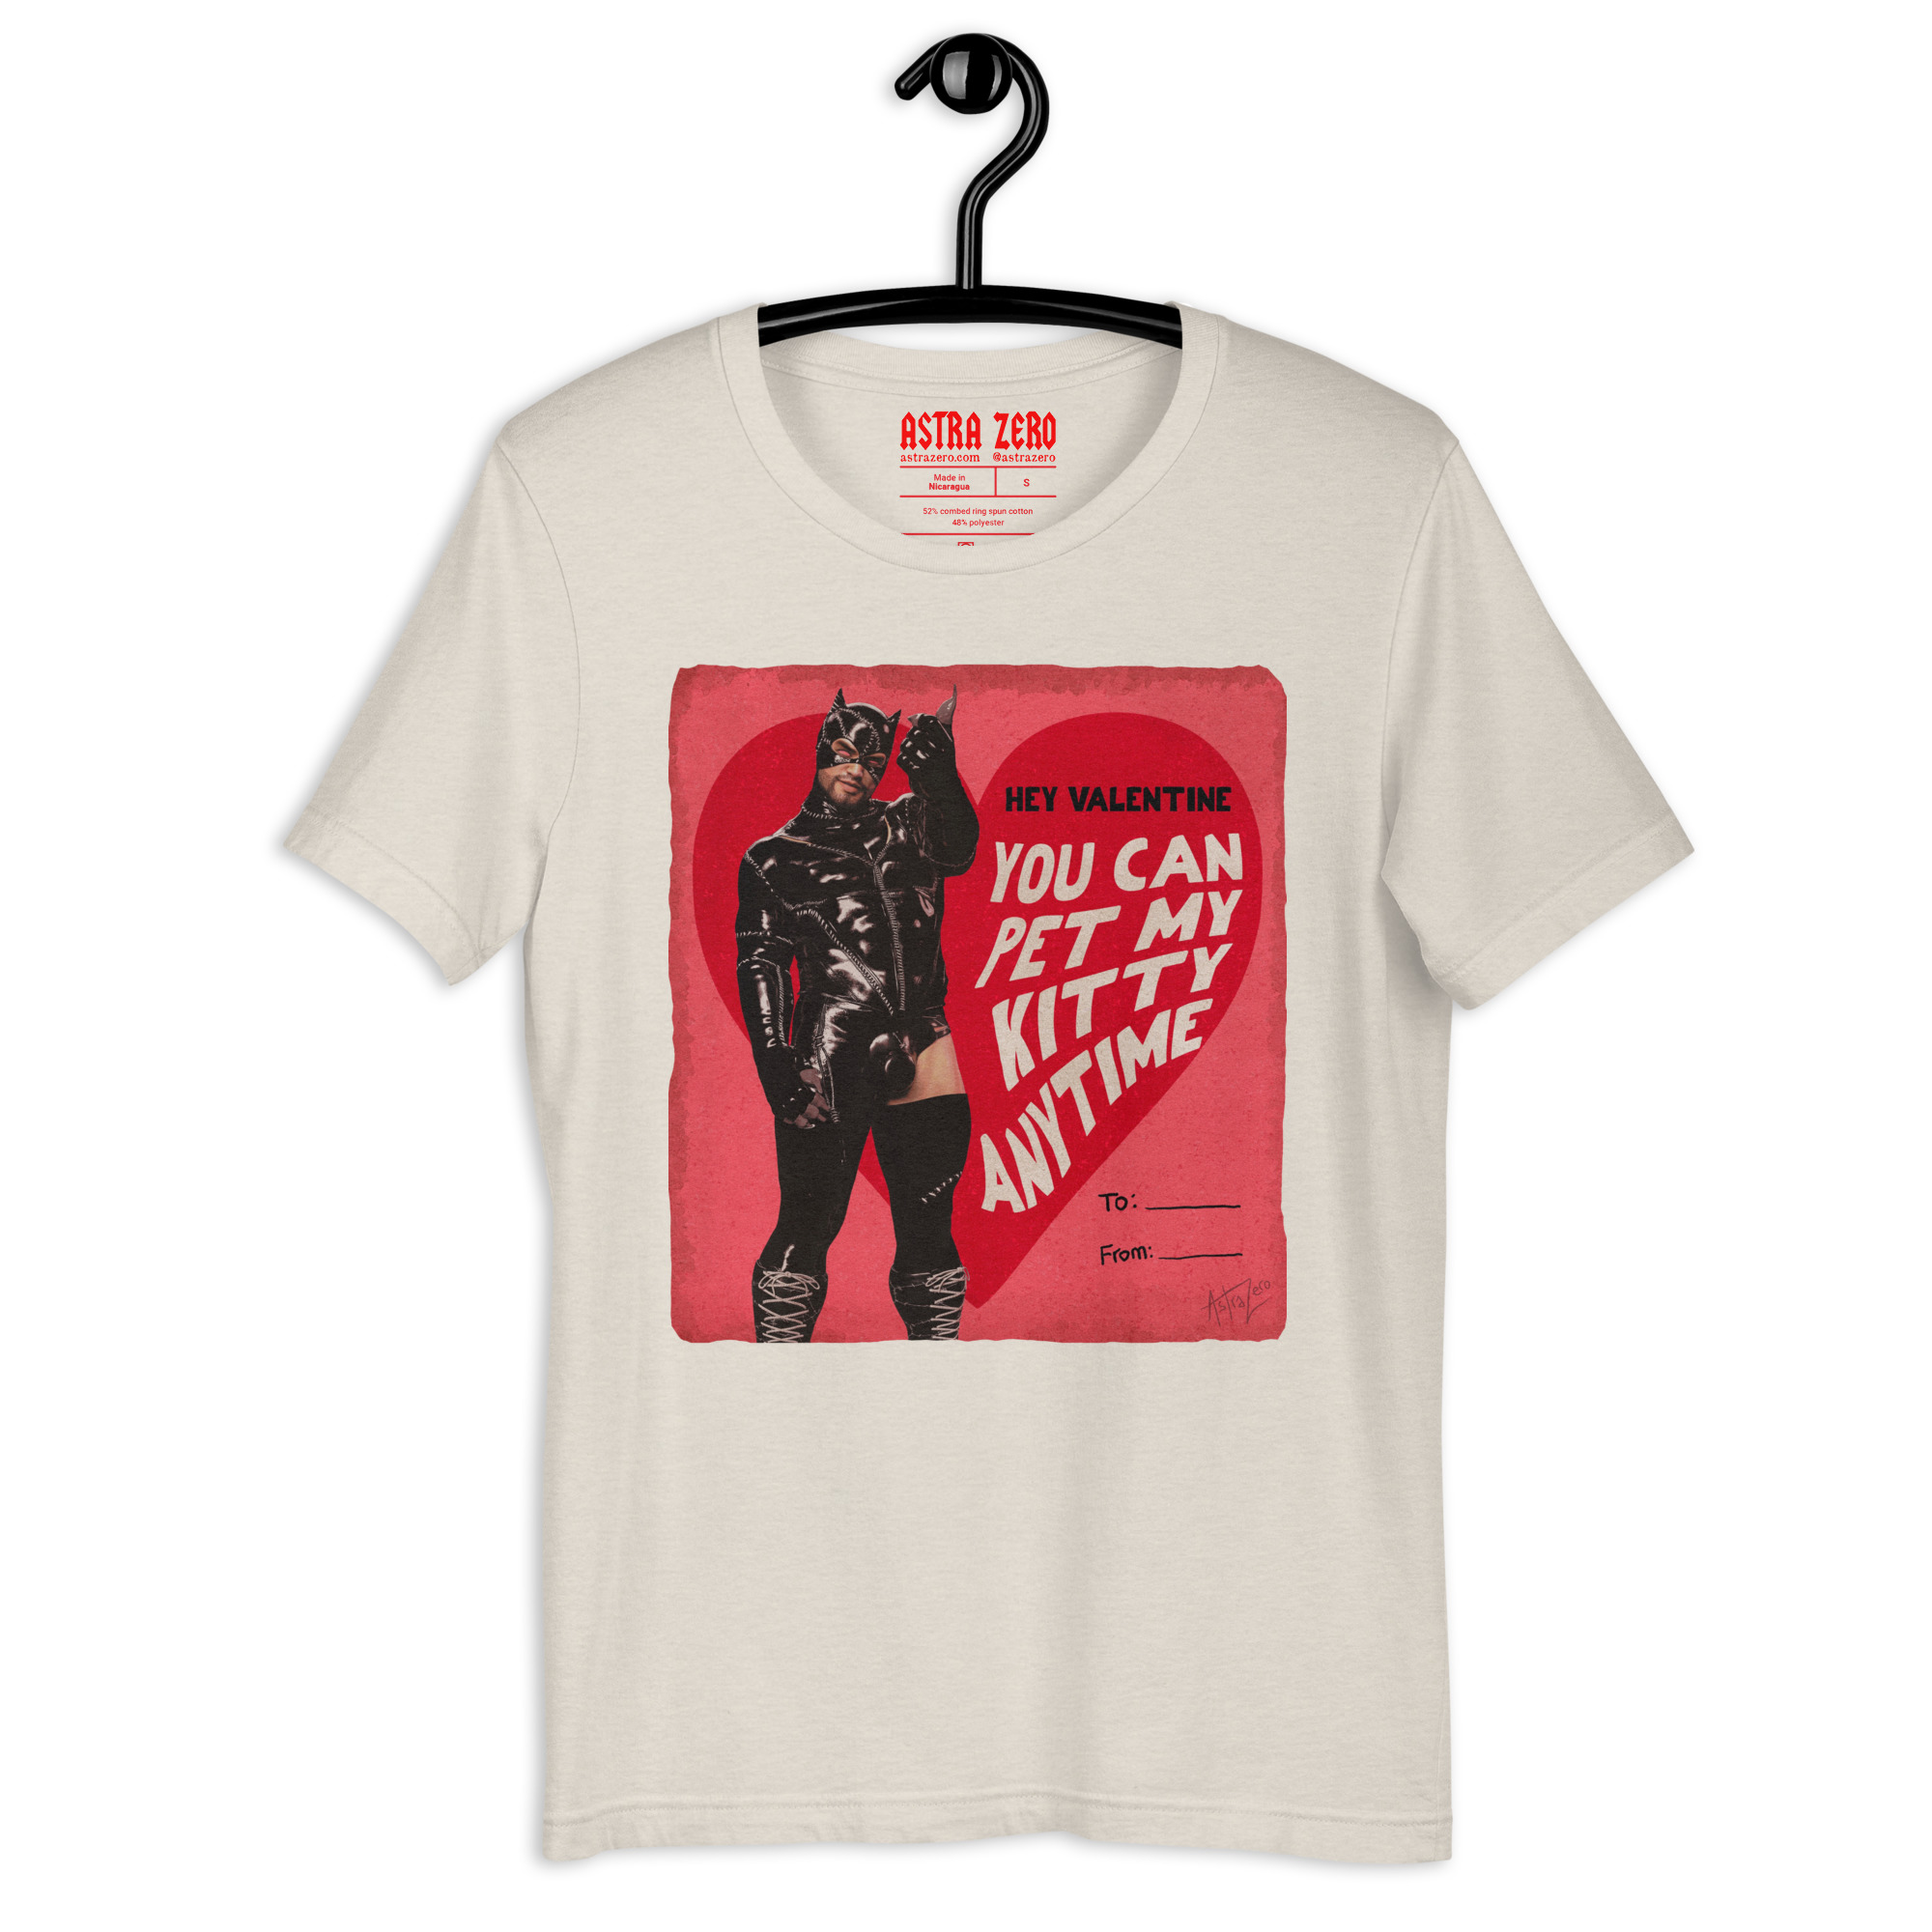 Featured image for “Valentine ( pet my kitty ) Unisex t-shirt”